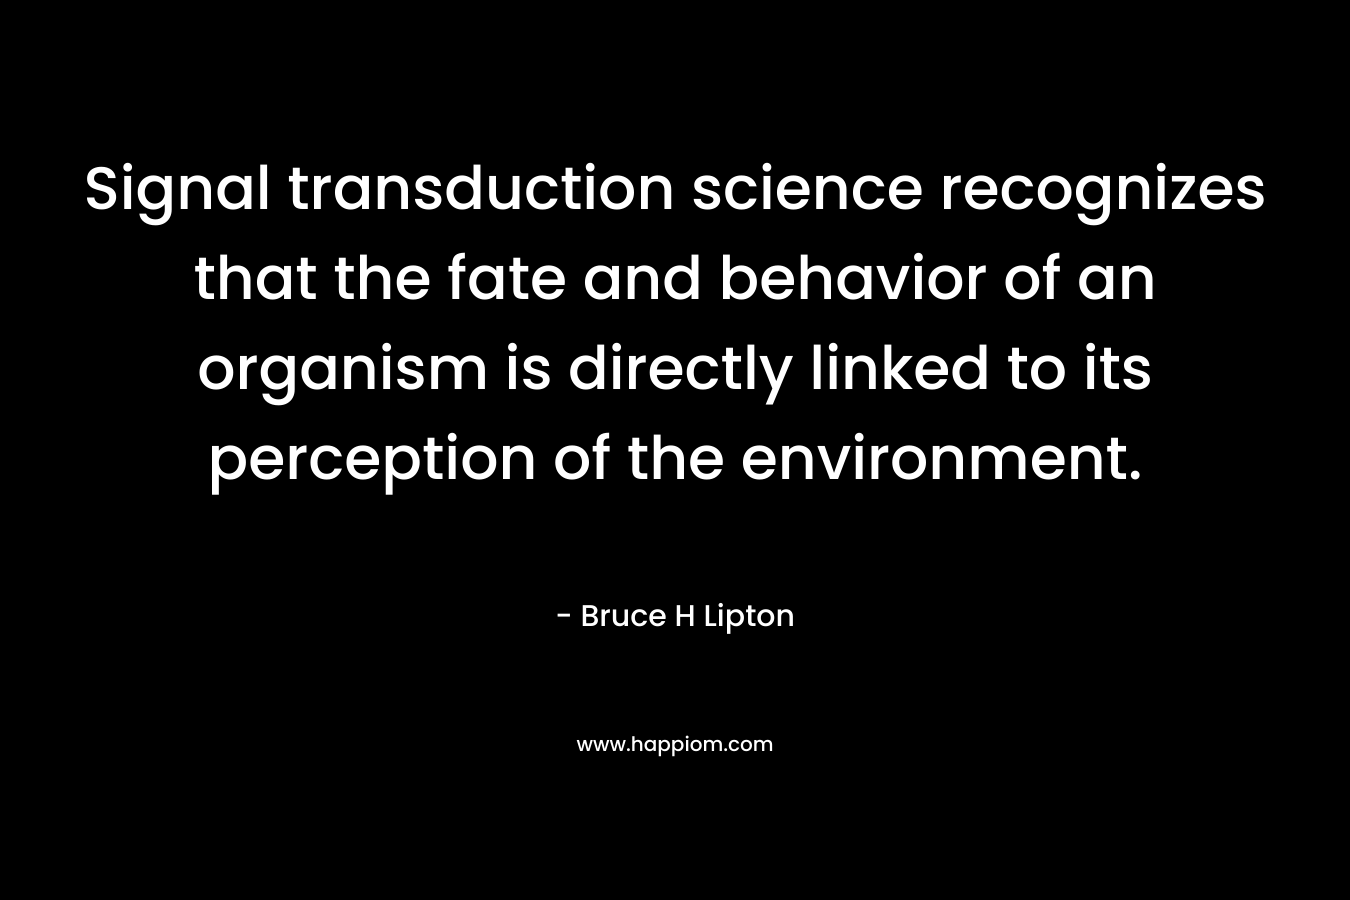 Signal transduction science recognizes that the fate and behavior of an organism is directly linked to its perception of the environment.